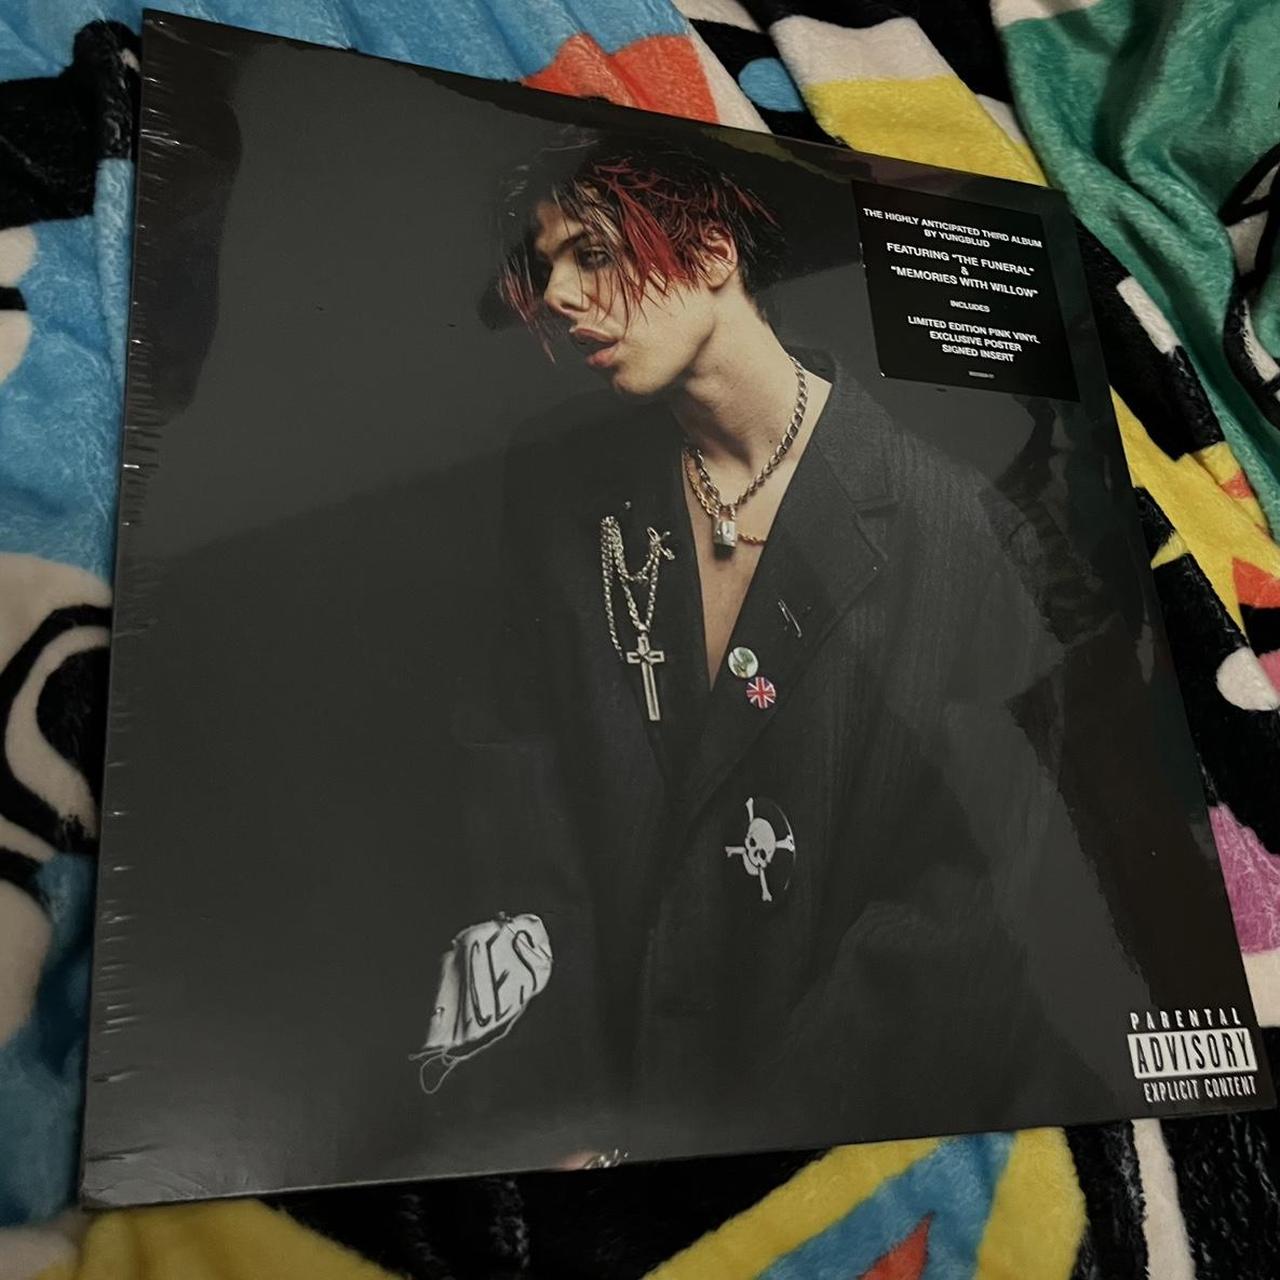 Yungblud target exclusive vinyl, never played opened - Depop